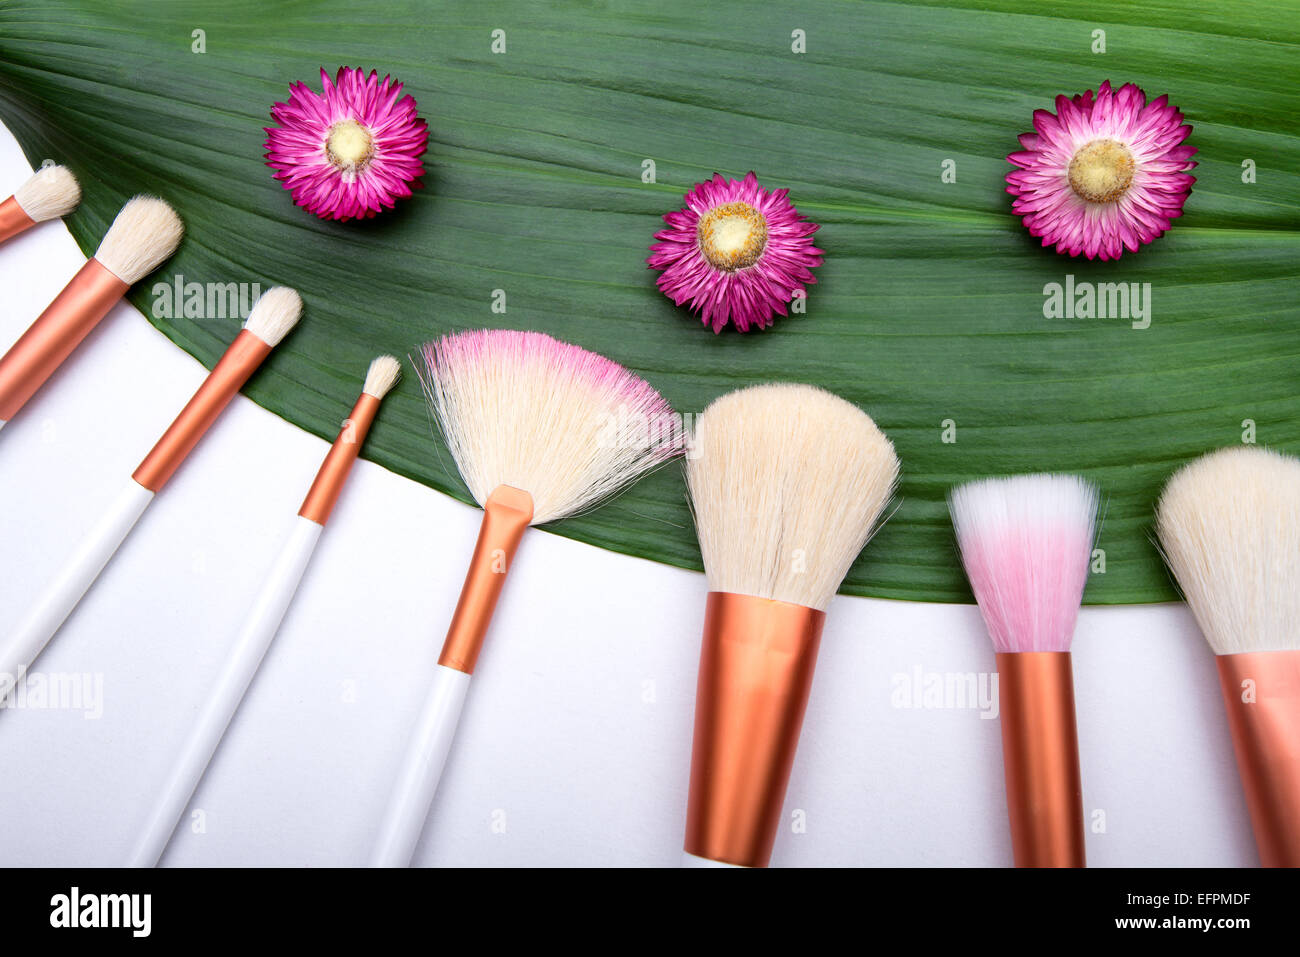 Makeup Brushes on green leaf with small flowers Stock Photo